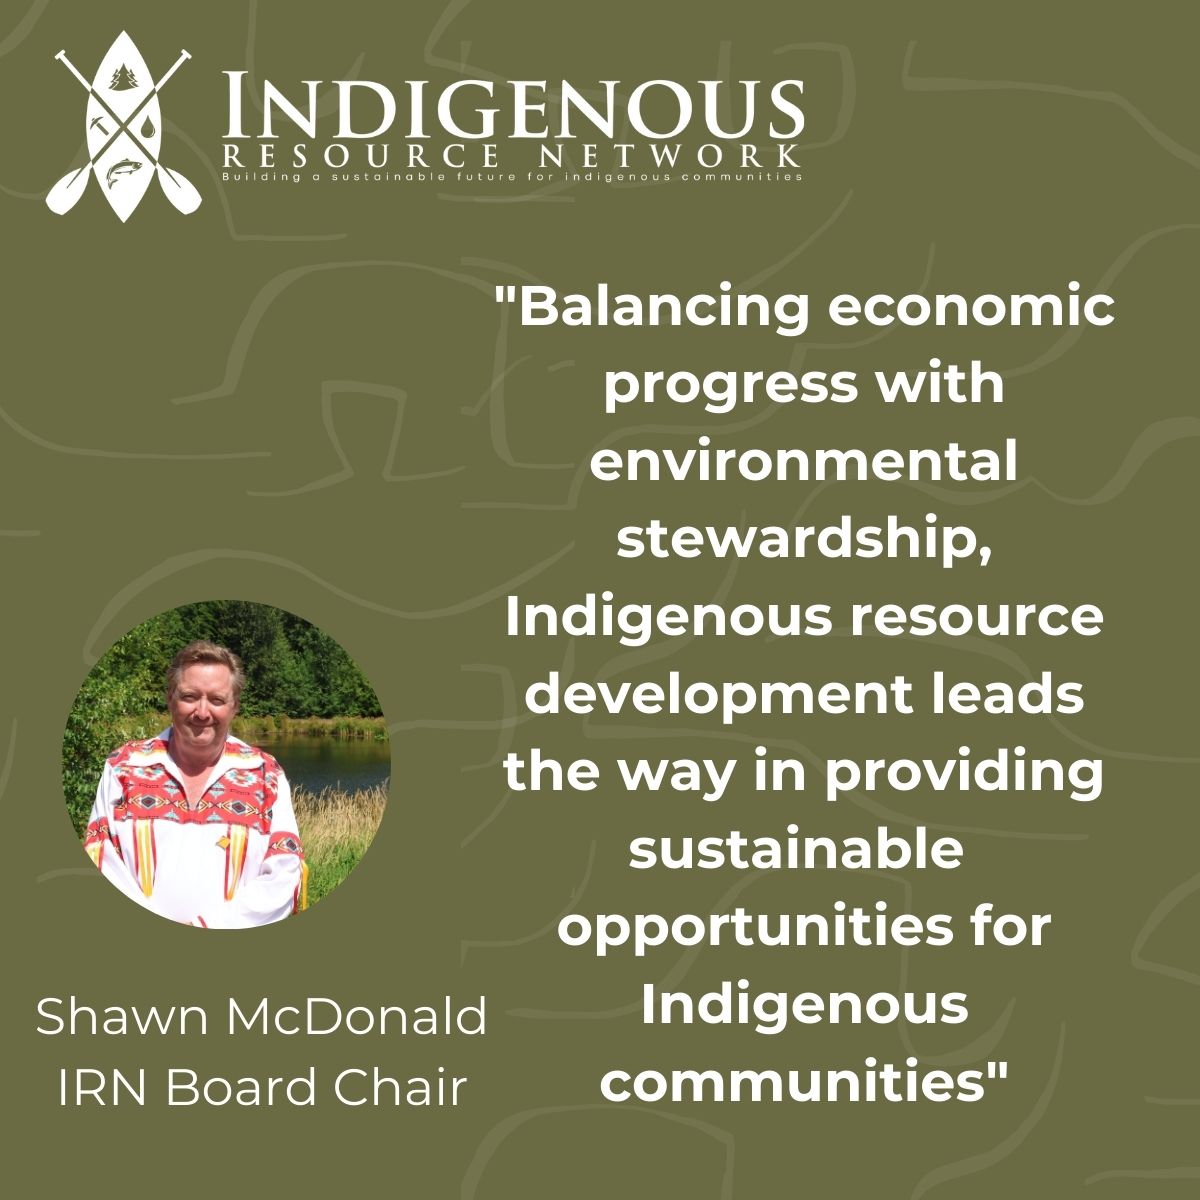 Some insight from our Board Chair, Shawn McDonald. His forward-thinking prioritizes Indigenous seven-generation teachings for long-term prosperity in Indigenous communities while being stewards of the environment.